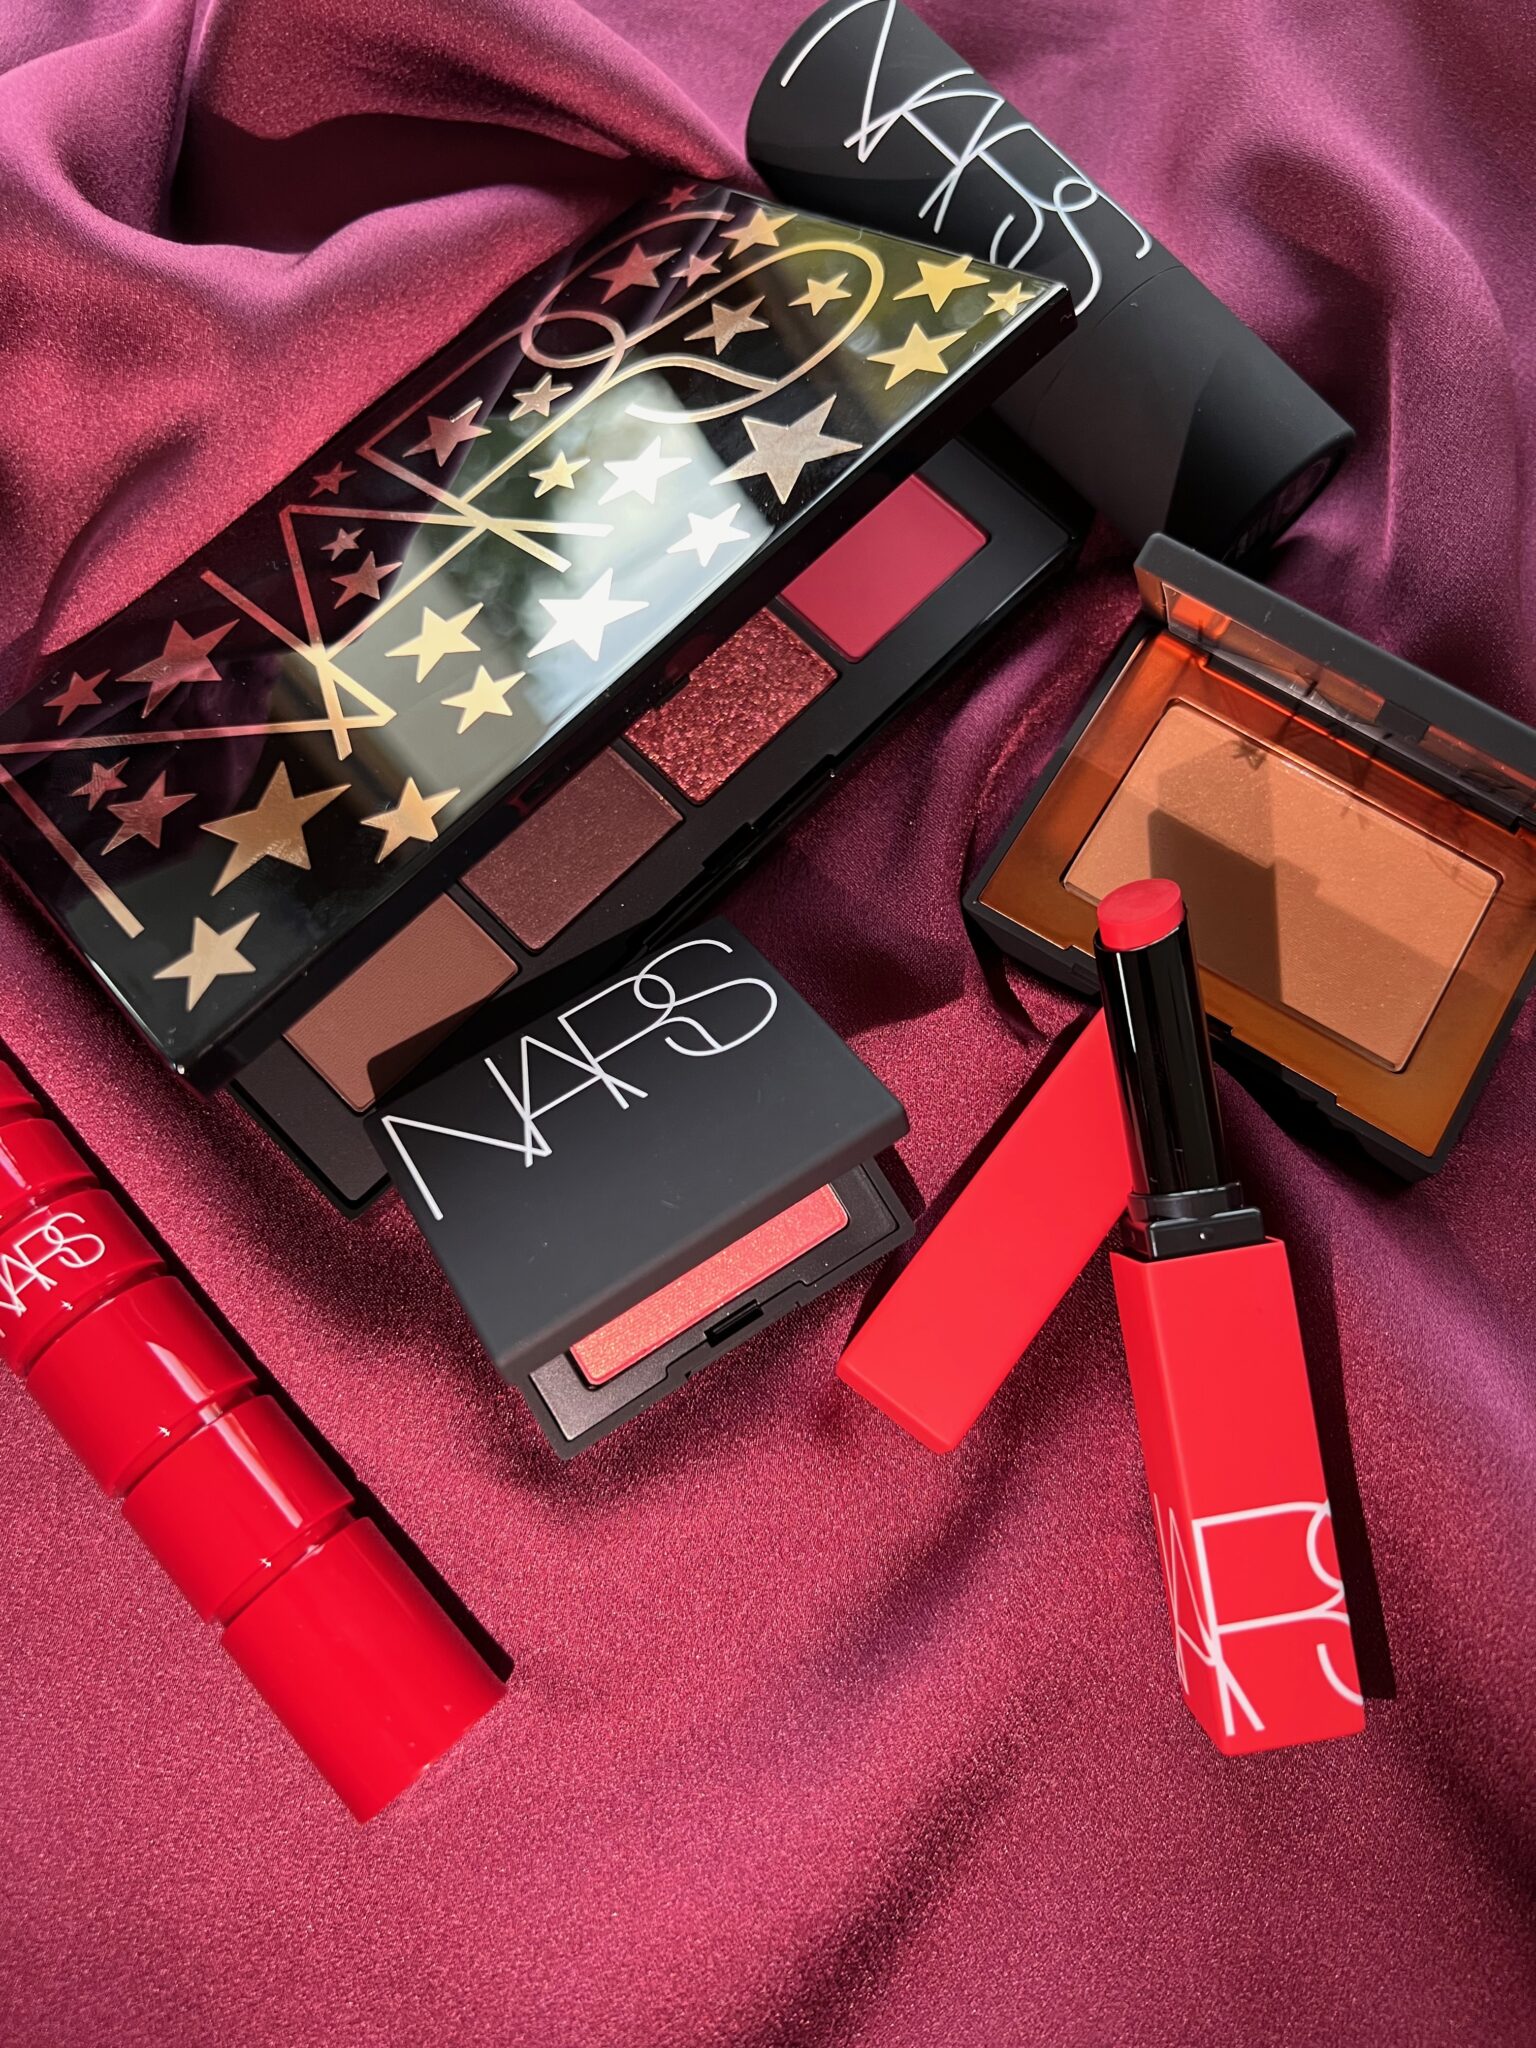 Christmas at Sephora - Top Holiday 2022 Gift Sets For Women. Nars, Sephora, Benefit and more. 17